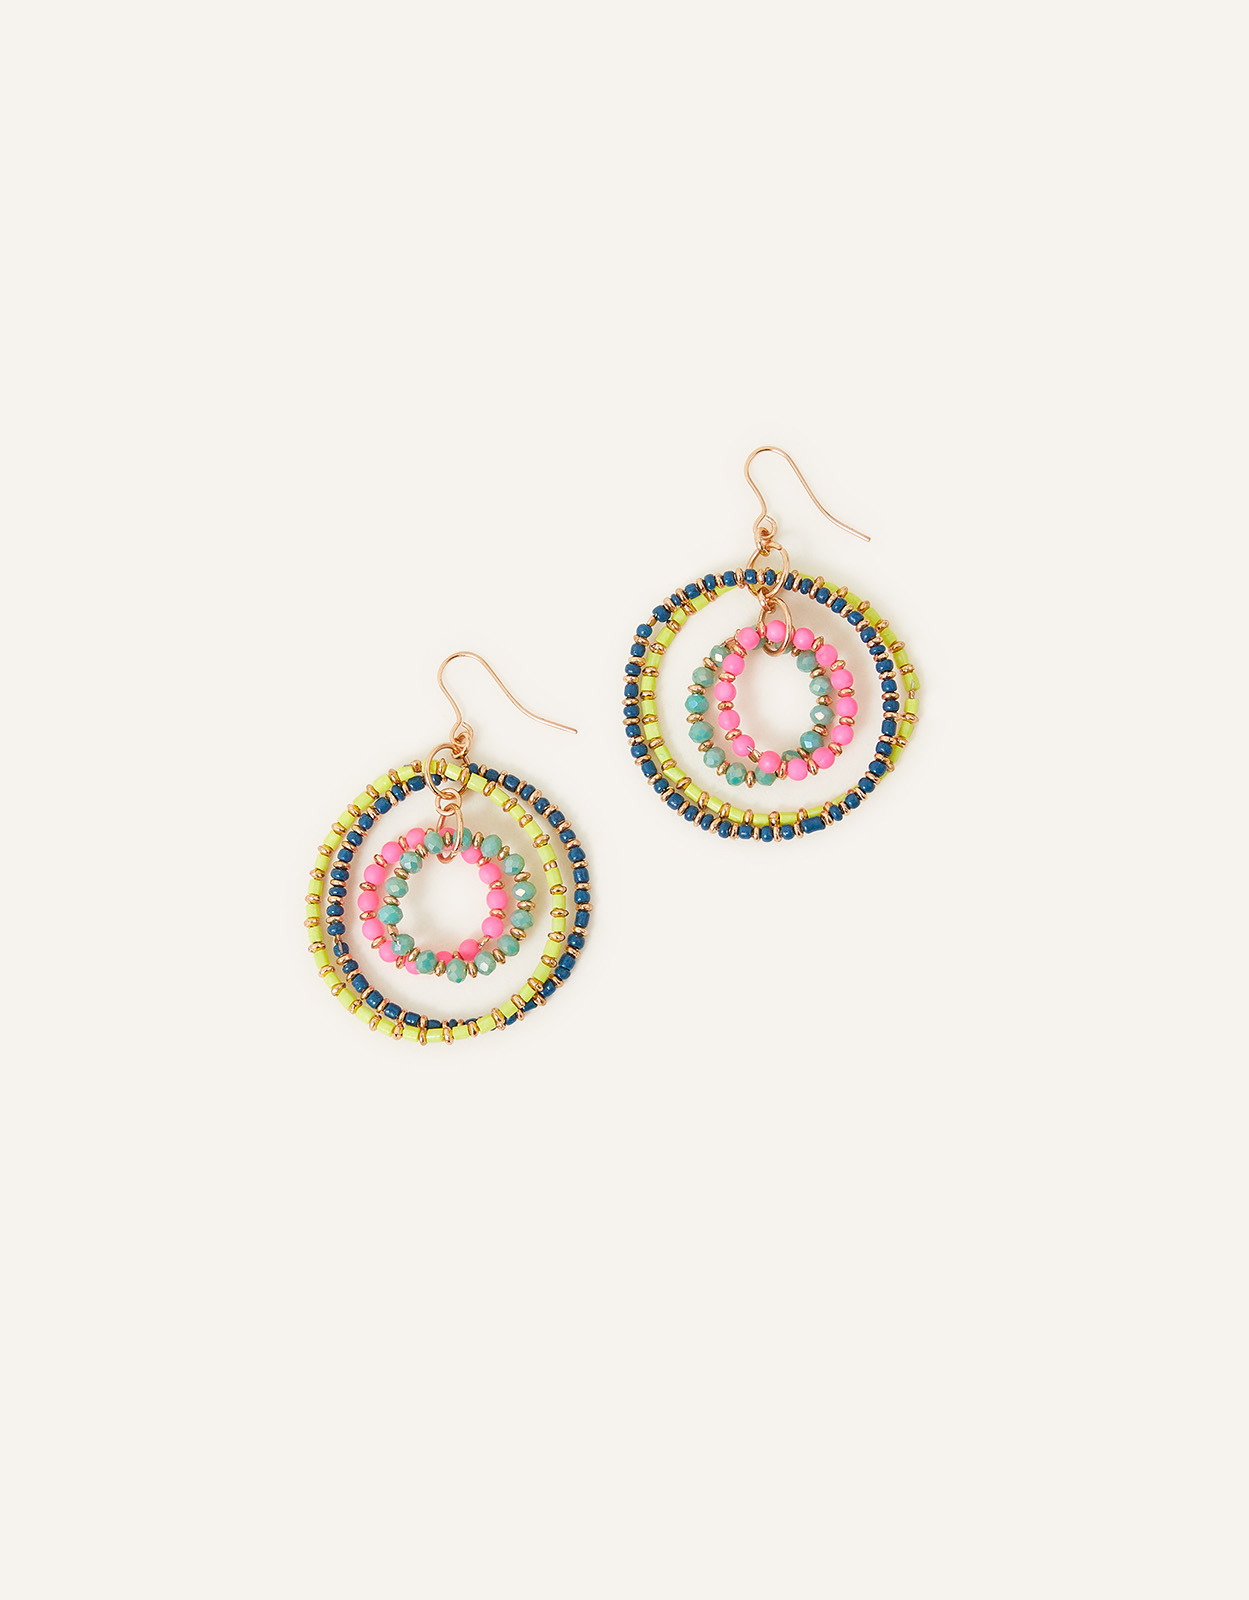 Accessorize Women's Gold, Pink and Green Beaded Hoop Earrings, Size: 5cm